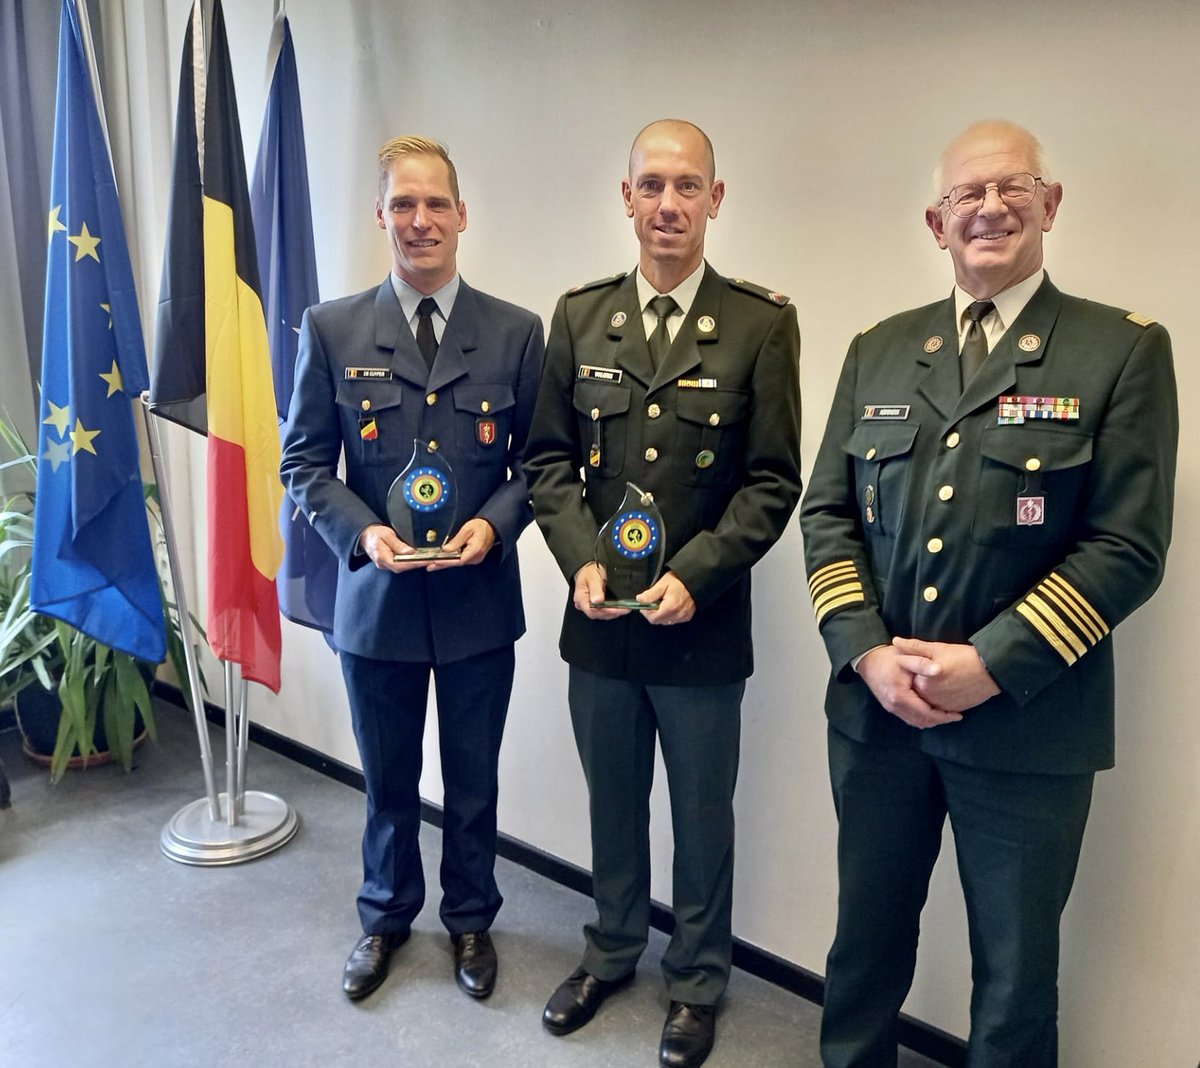 Today @GenNeirinckx handed out the @BelgiumDefence sports awards 2021 . @MartenVanRiel Best Performance among all @TopsportBelDef athletes ( in 🇯🇵 not in this picture) . @simondecuyper Best Performance among all military . @frevanlierde Sports Merit for his entire career